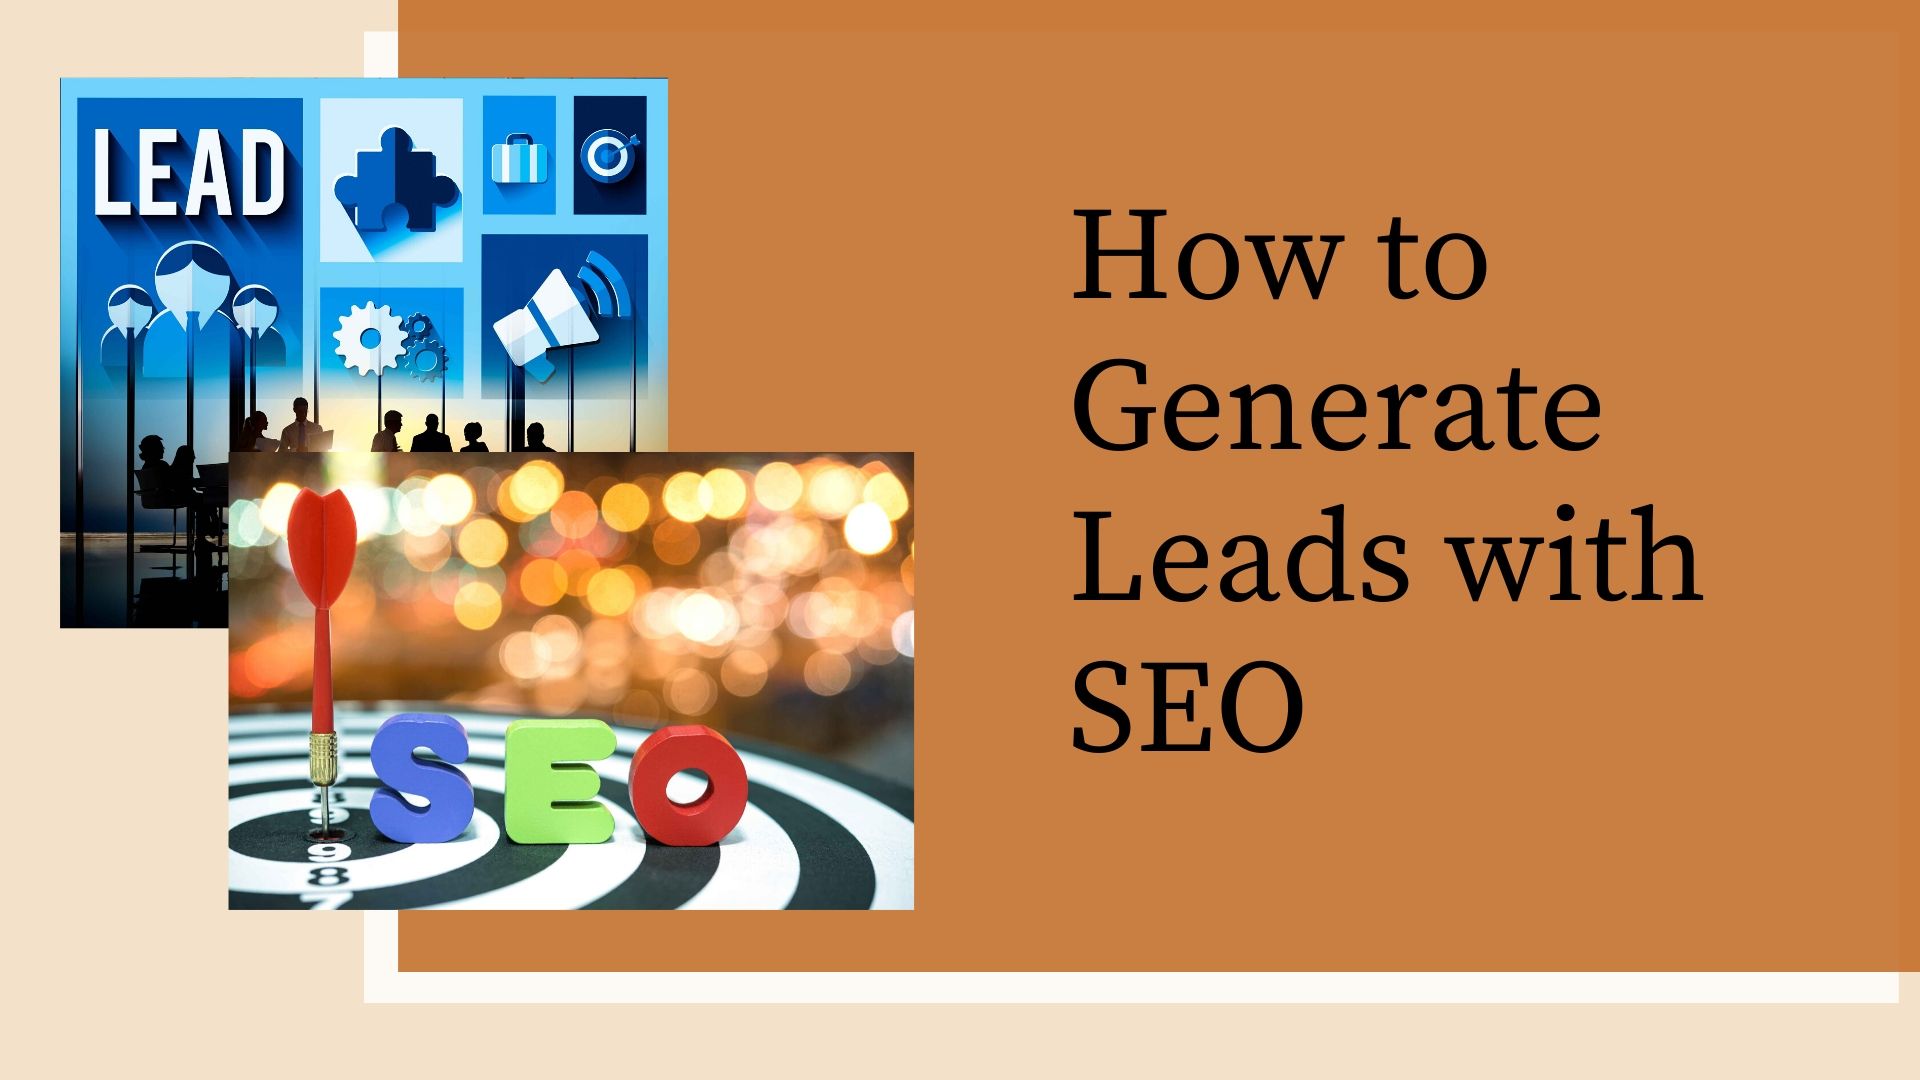 Lead with SEO